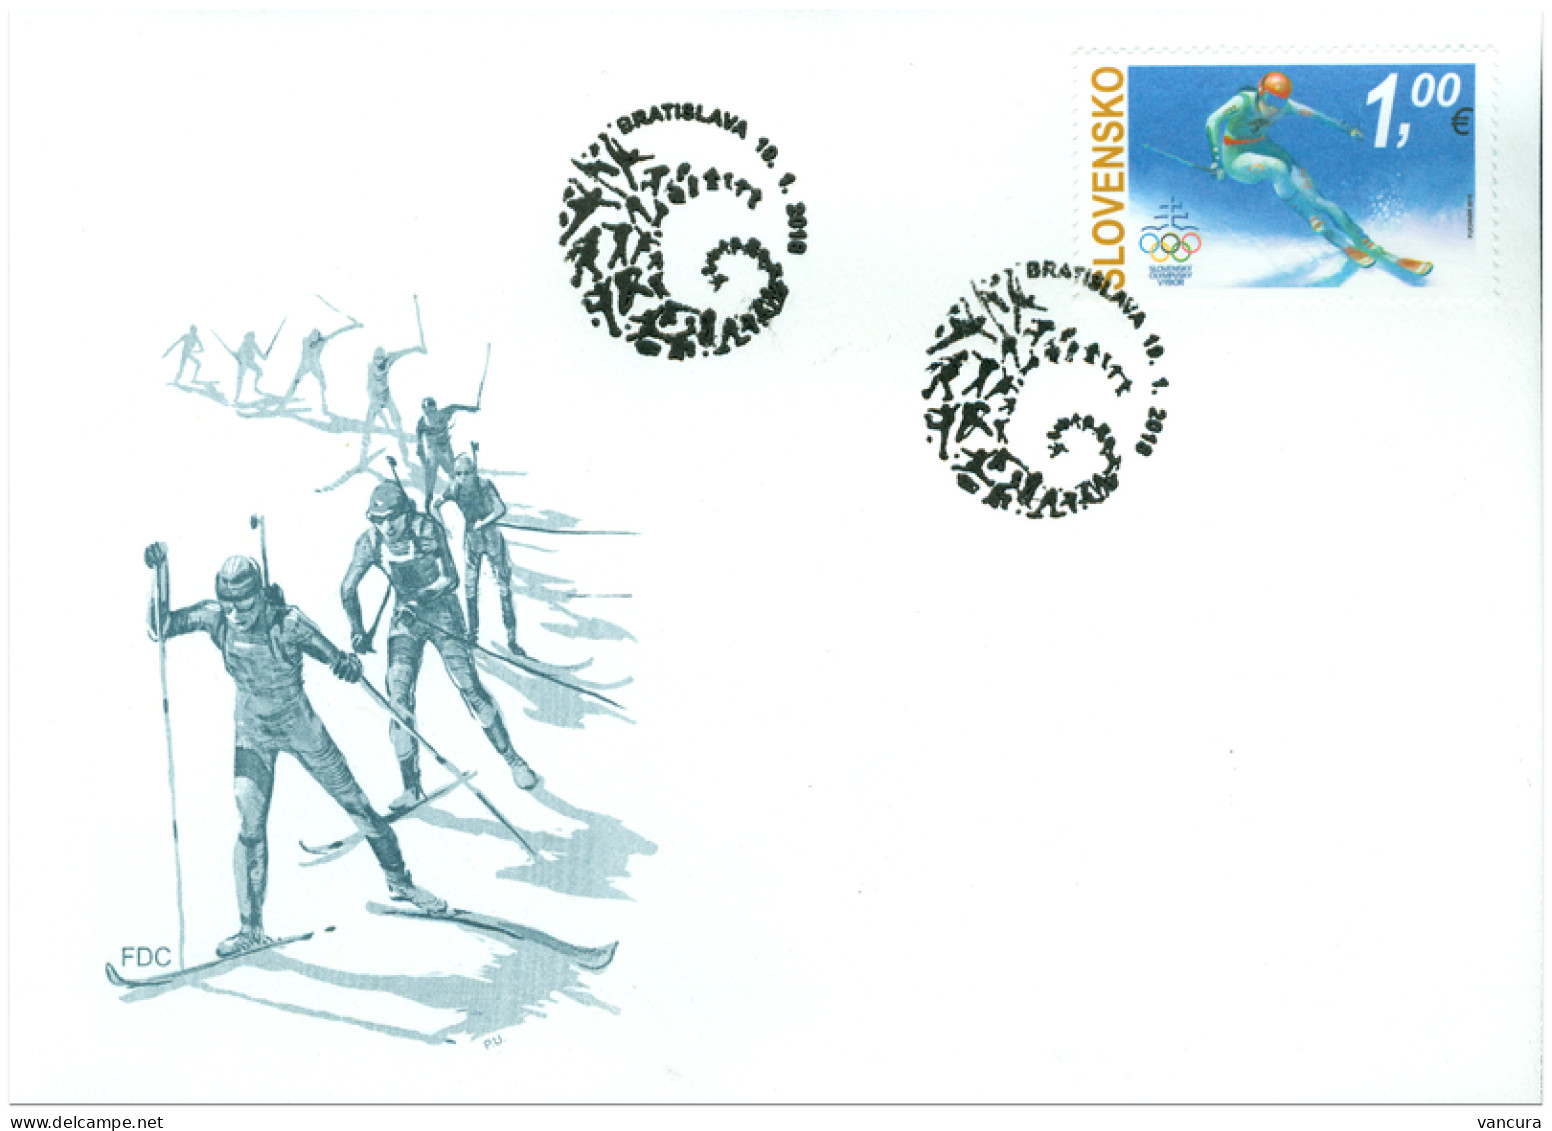 FDC 653 And 655 Slovakia. Winter Olympic Games Pyeongchang And Paralympic Games 2018 - Inverno 2018 : Pyeongchang